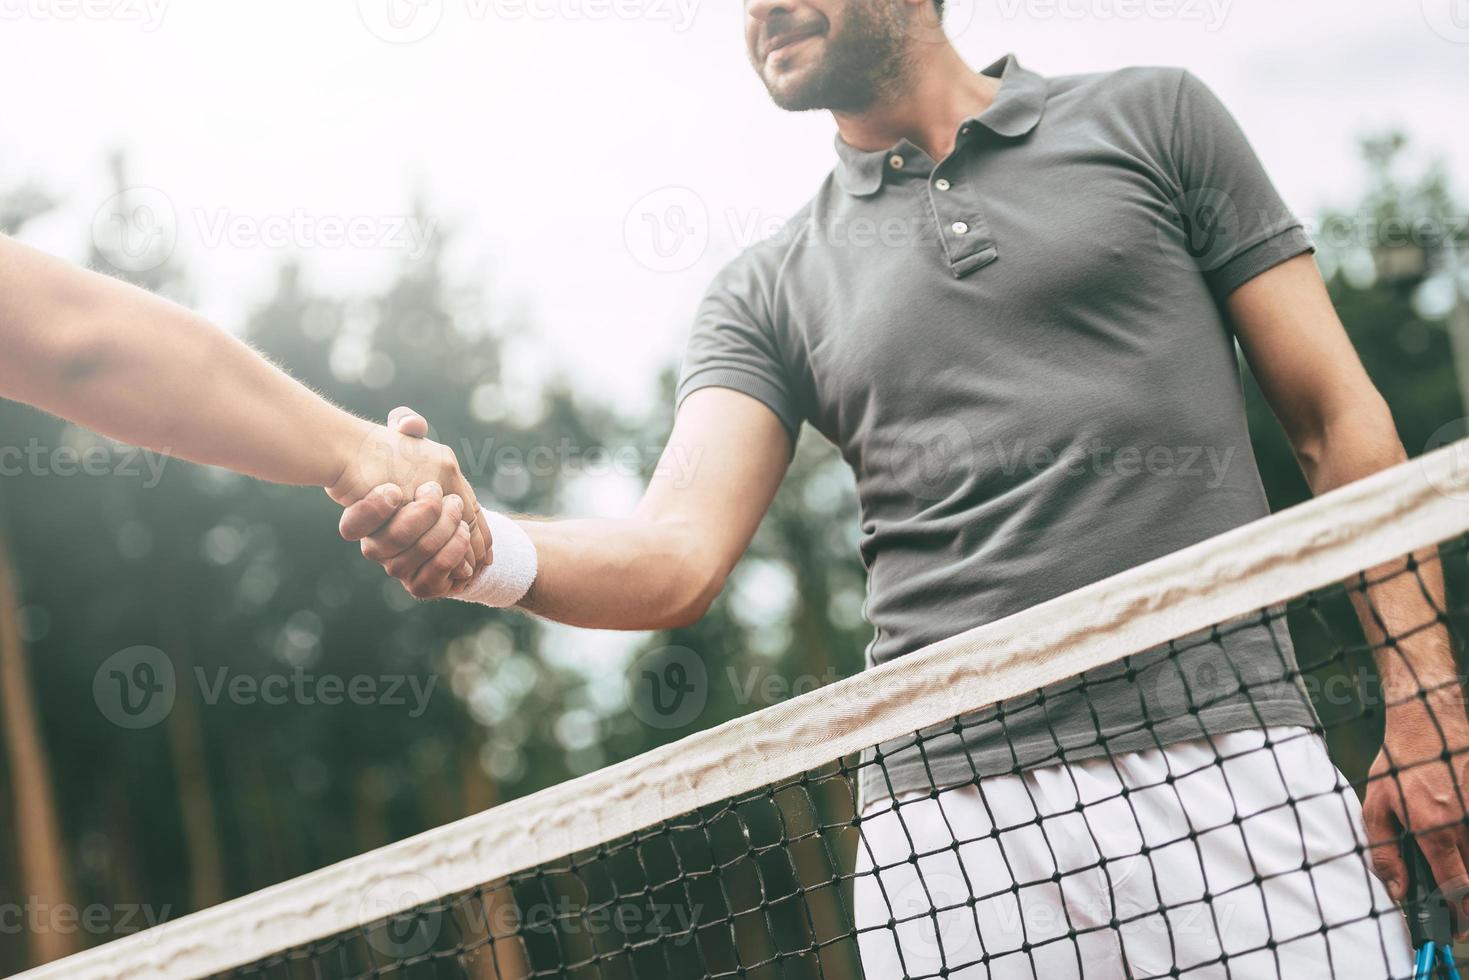 Thank you for the game Low angle view conceptual image of two man in sports clothing shaking hands while standing near the tennis net on court photo